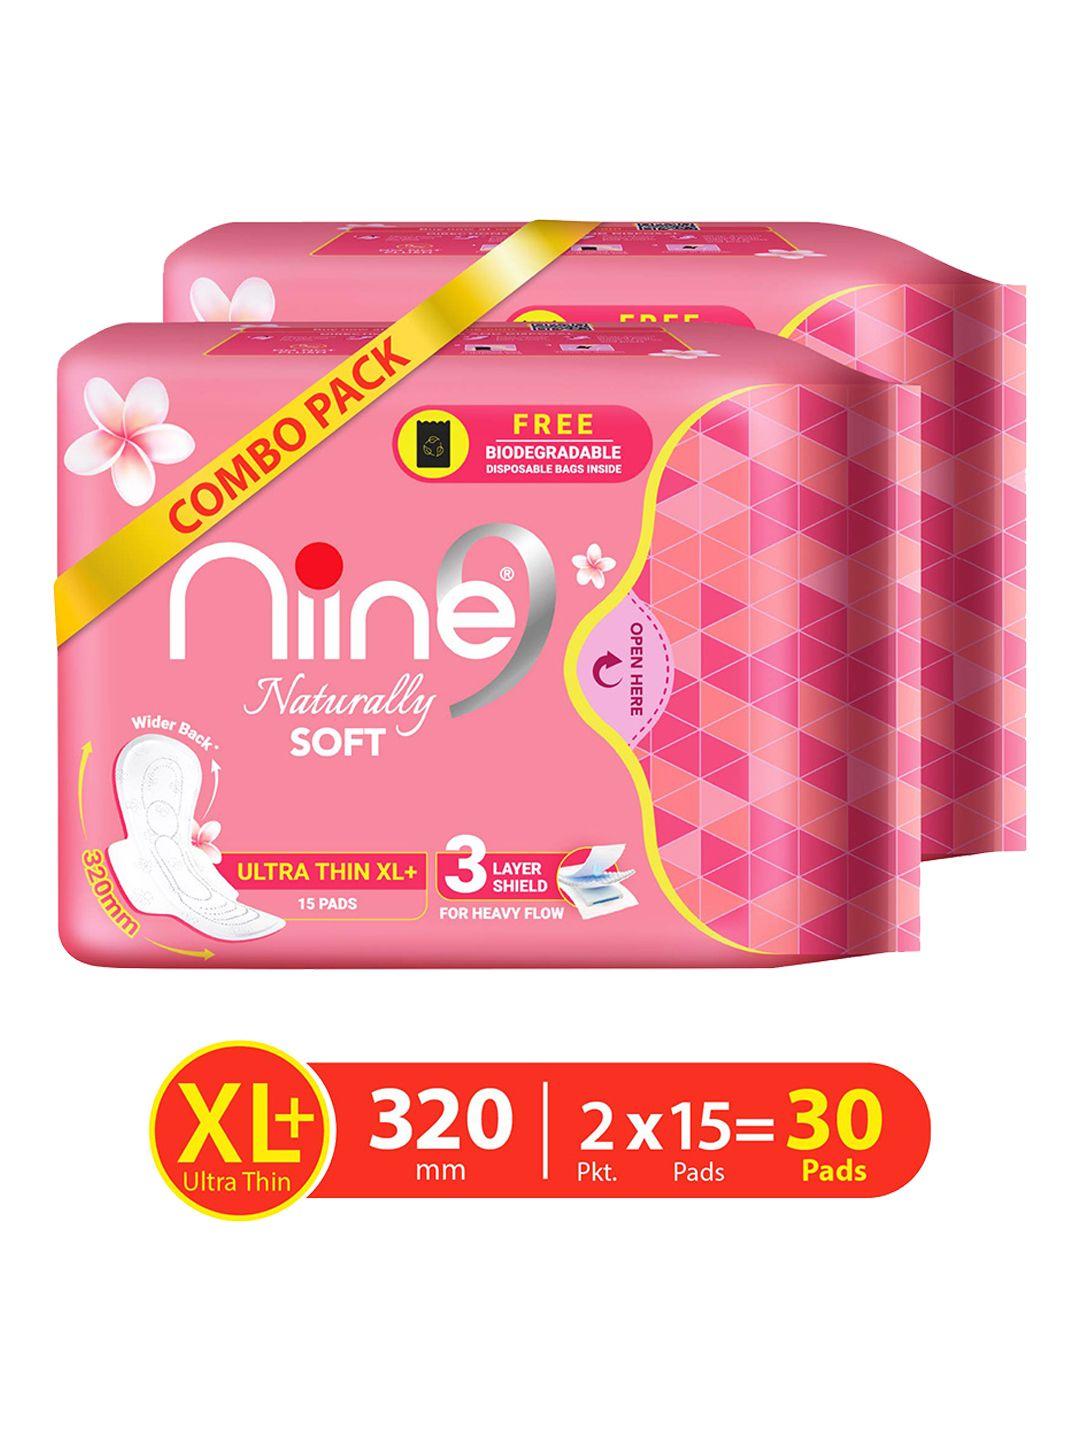 niine set of 2 naturally soft ultra thin xl+ sanitary napkins for heavy flow- 15 pads each